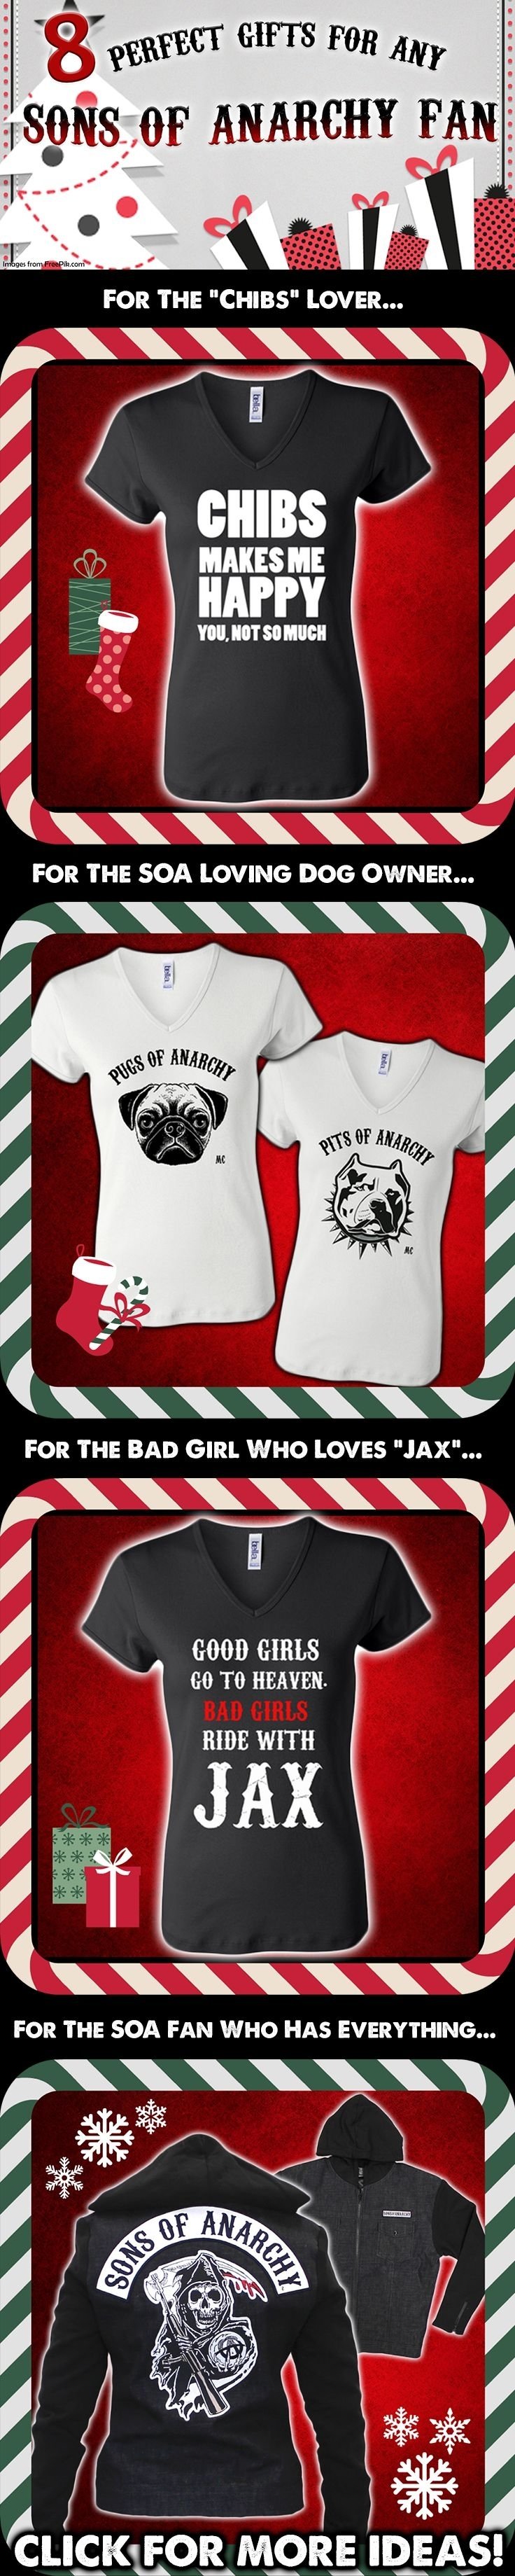 10 Attractive Sons Of Anarchy Gift Ideas 75 best soa christmas images on pinterest charlie hunnam jax 2022